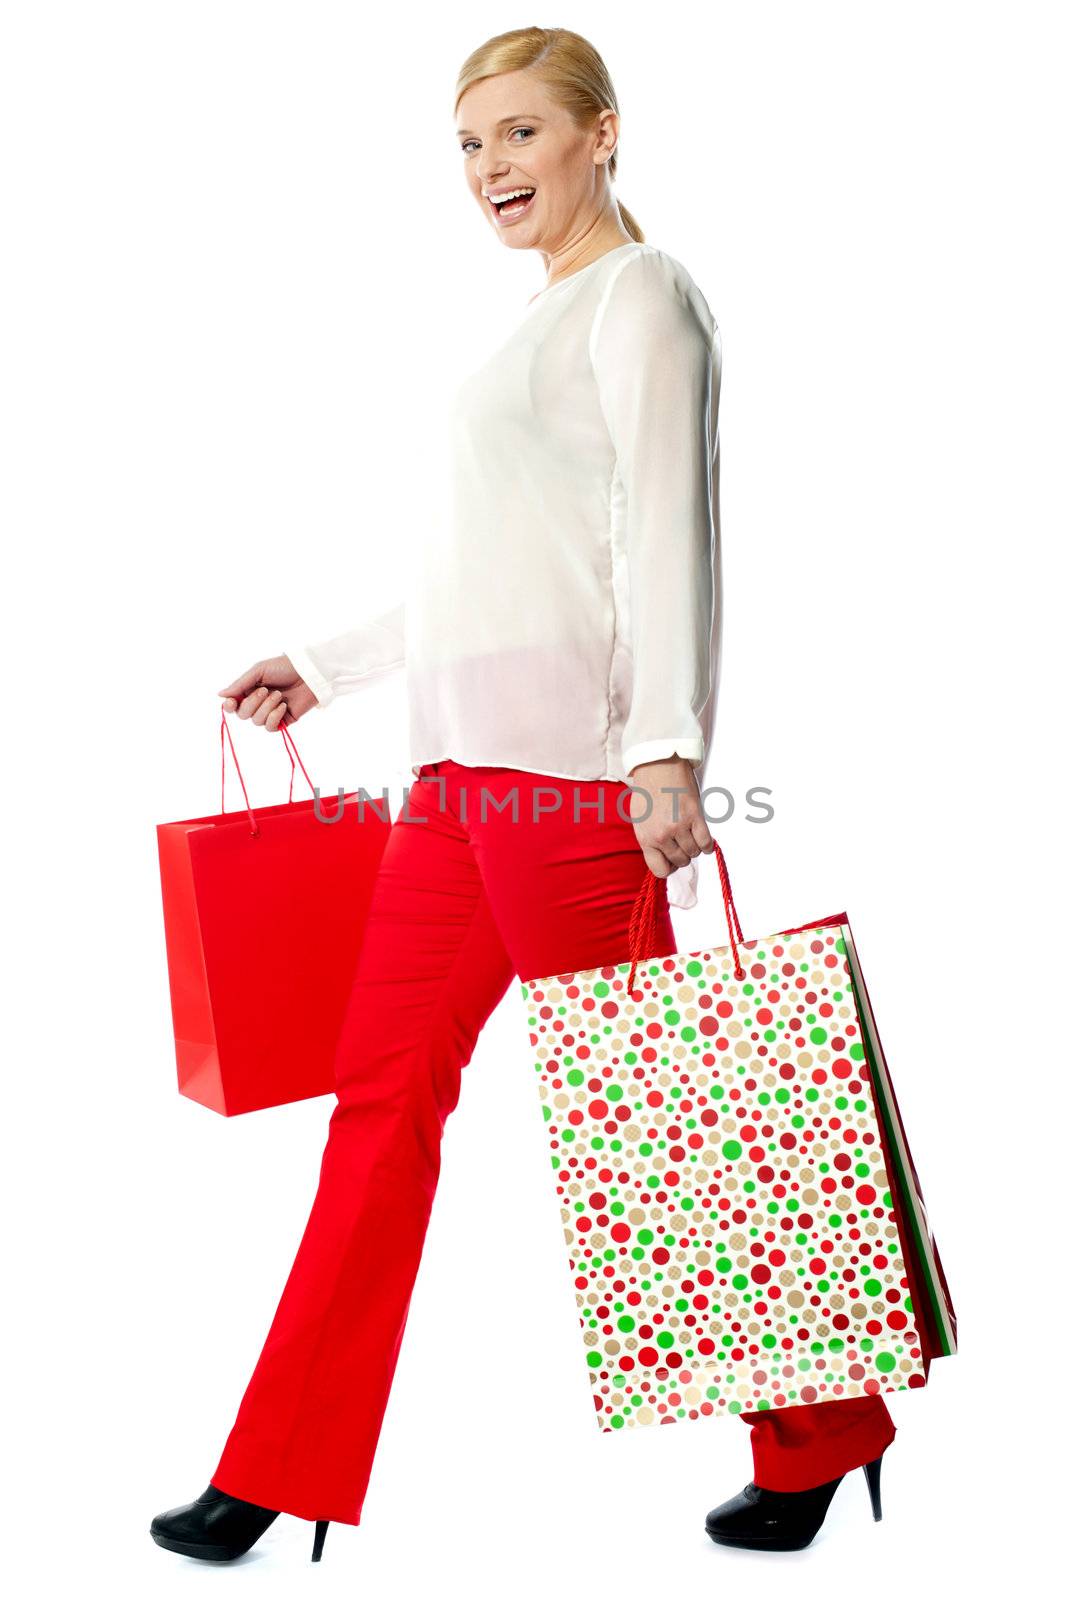 Pretty woman with shopping bags, walking. Isolated on white background